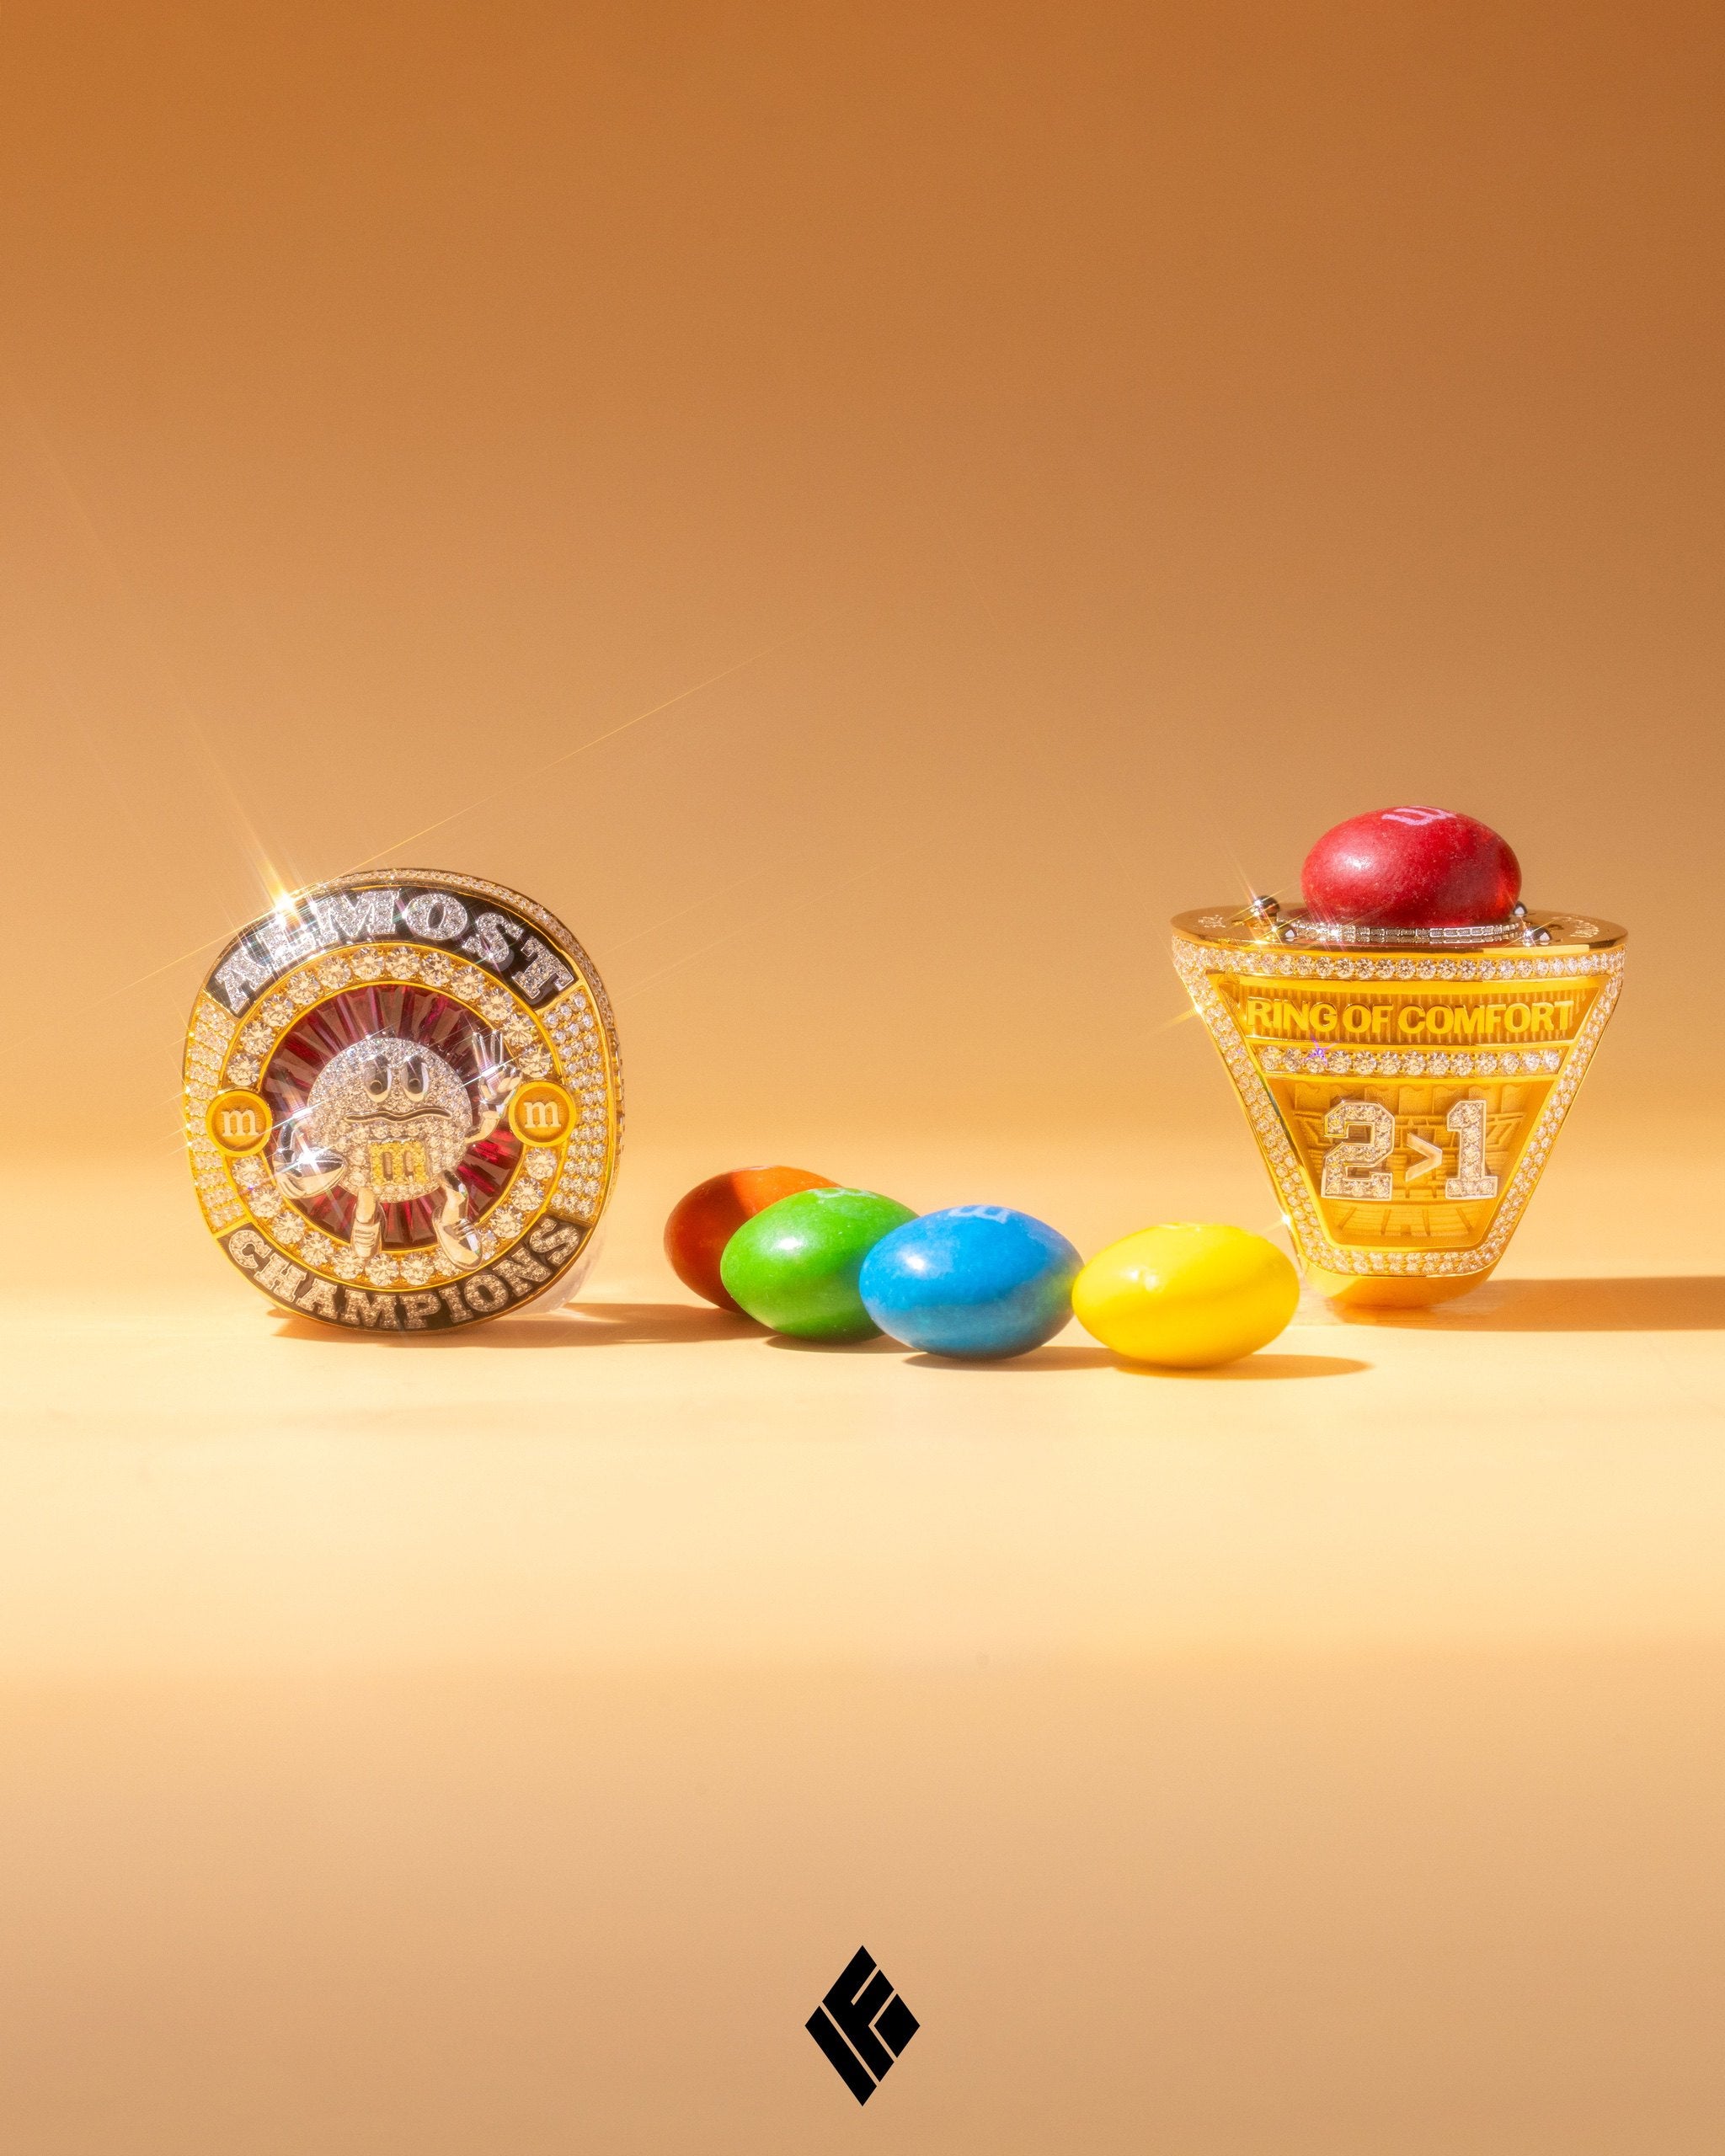 From Peanut Butter to Diamonds: The M&M's "Almost Champions" Ring